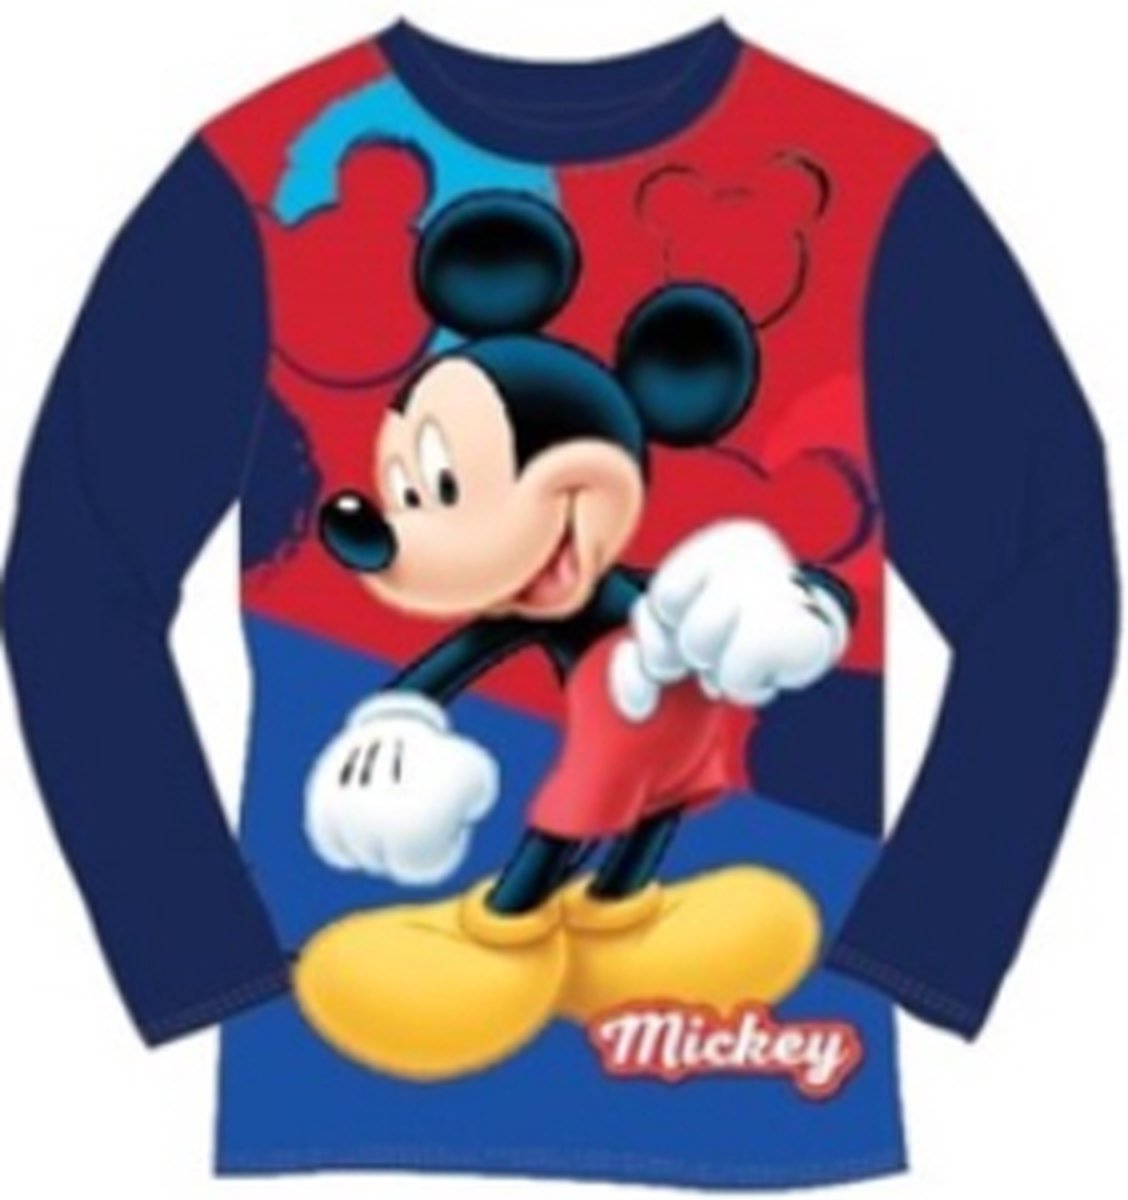 Mickey mouse long sleeve maat 92